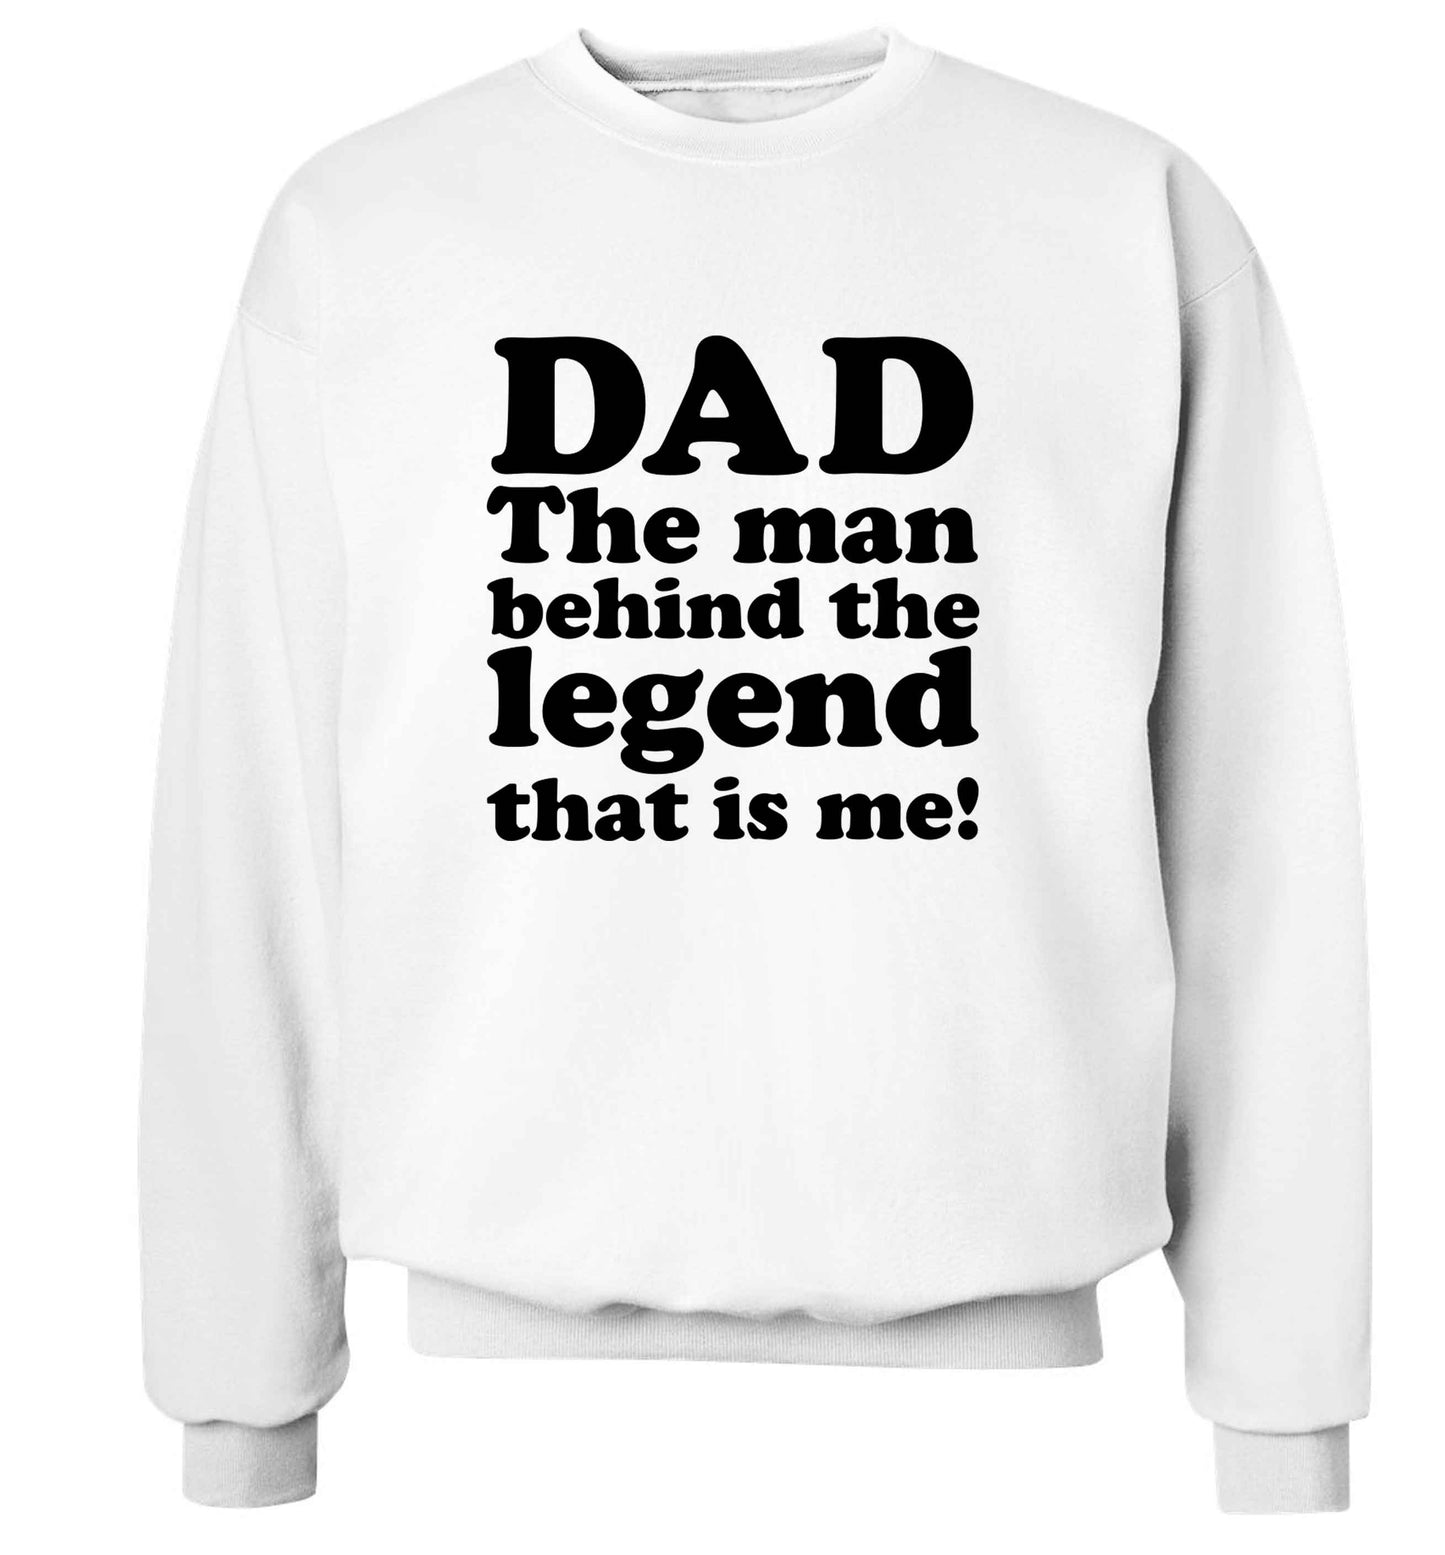 Dad the man behind the legend that is me adult's unisex white sweater 2XL